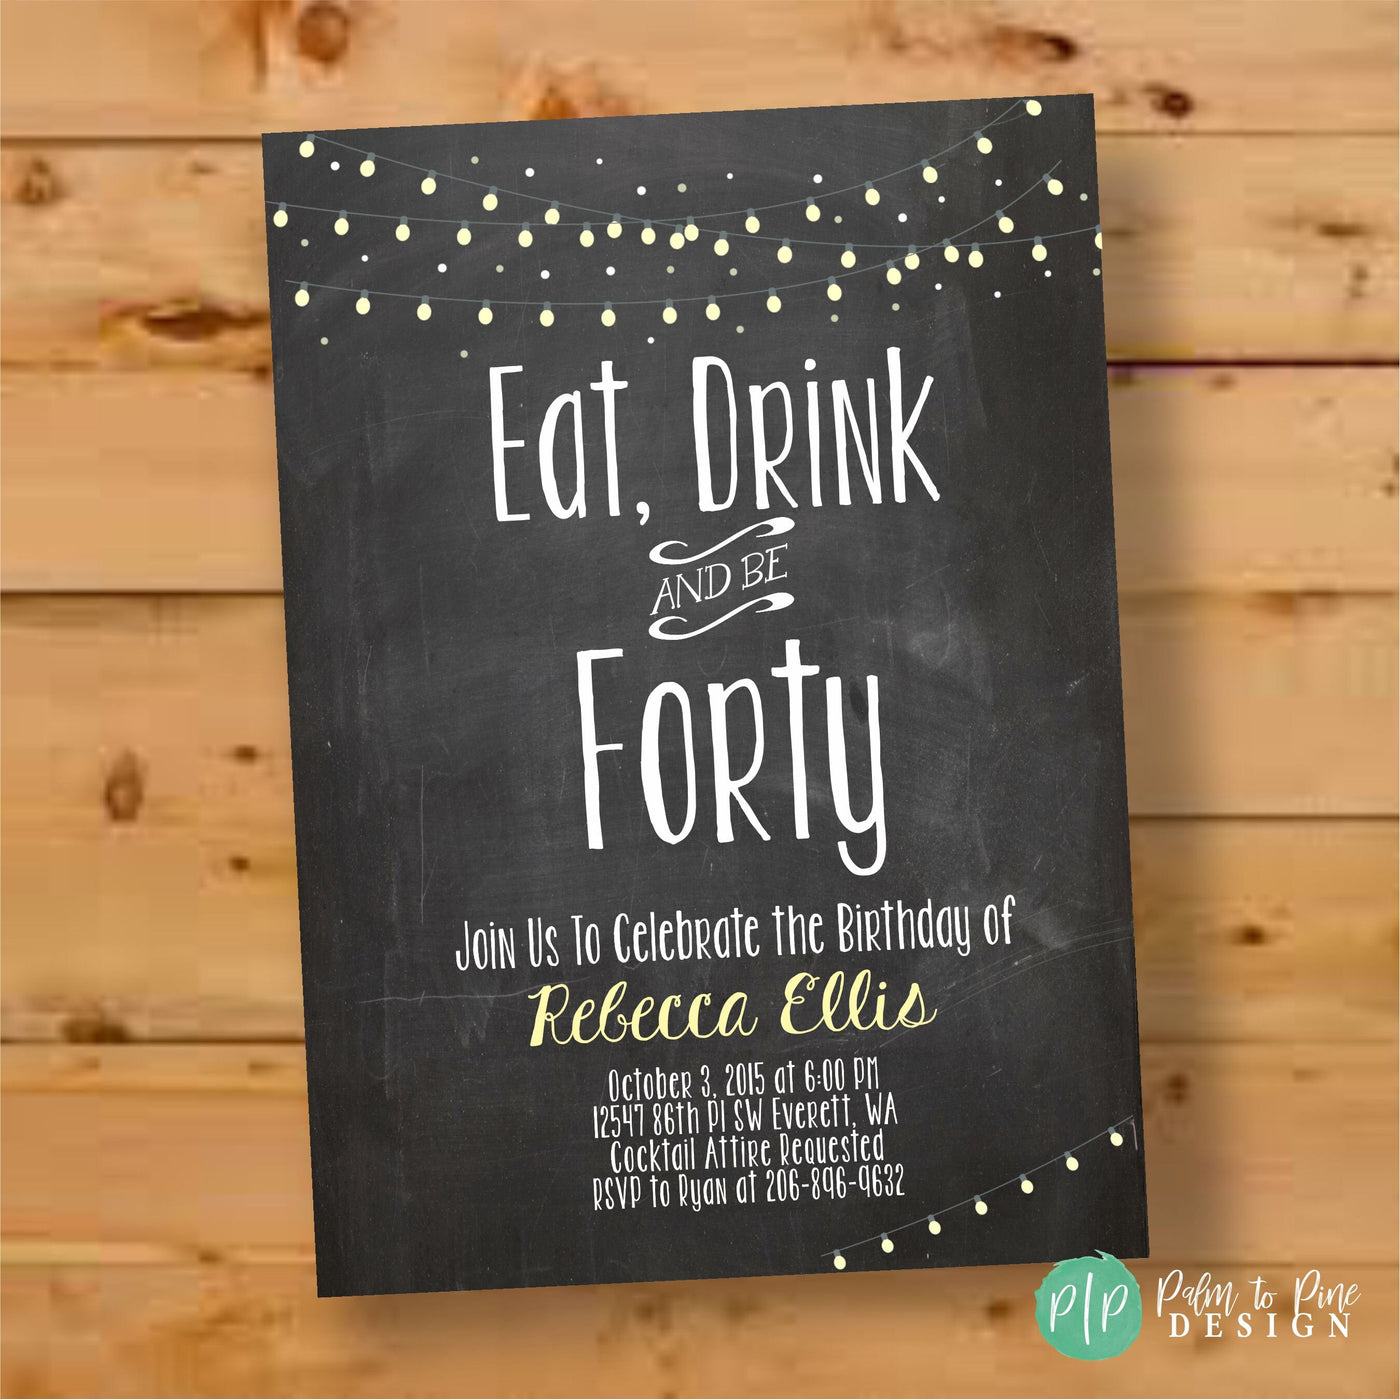 Adult Birthday Invitation, Fortieth birthday invite, Eat Drink and Be Forty, BBQ Invite, Light Strings, Chalkboard Birthday Invite, Lights